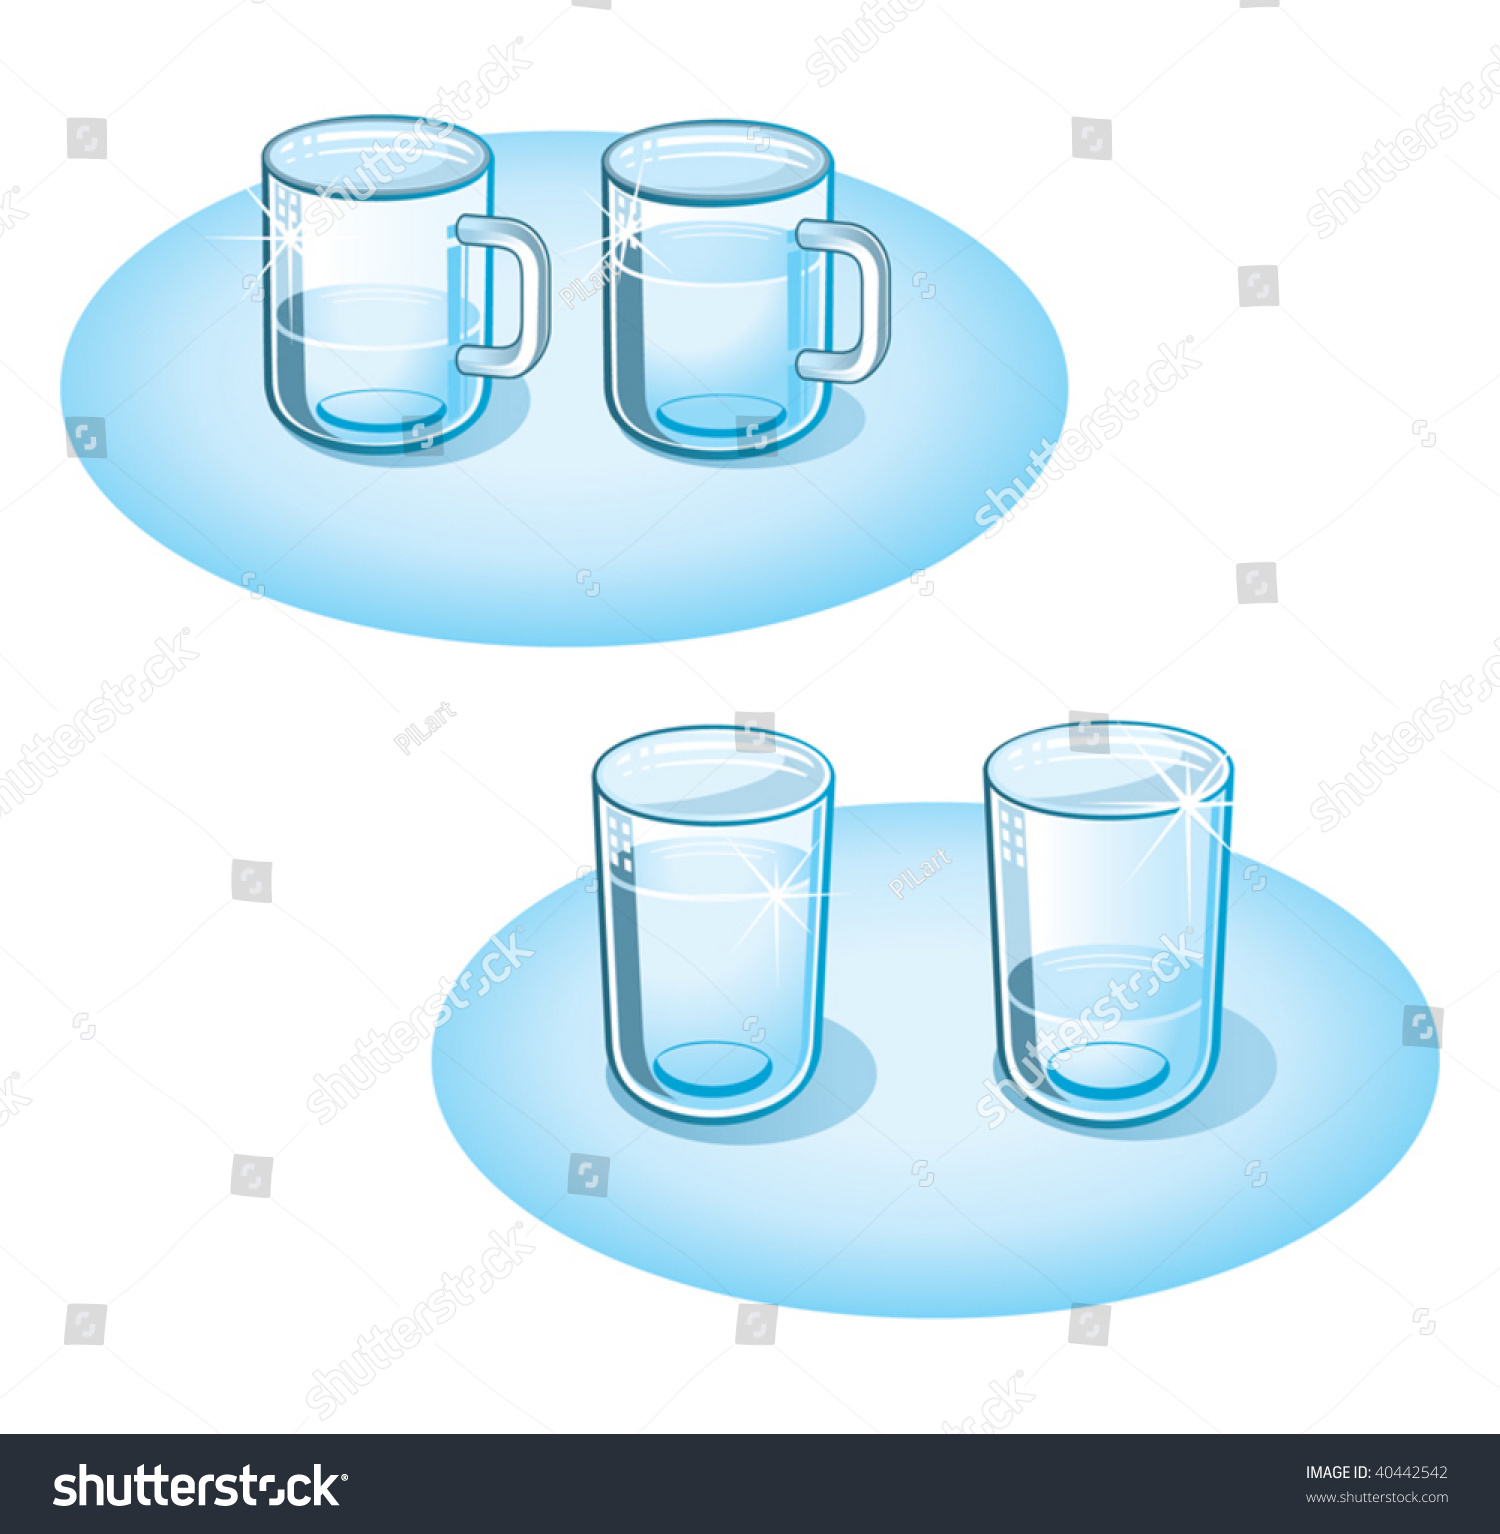 cup of water clipart - photo #44